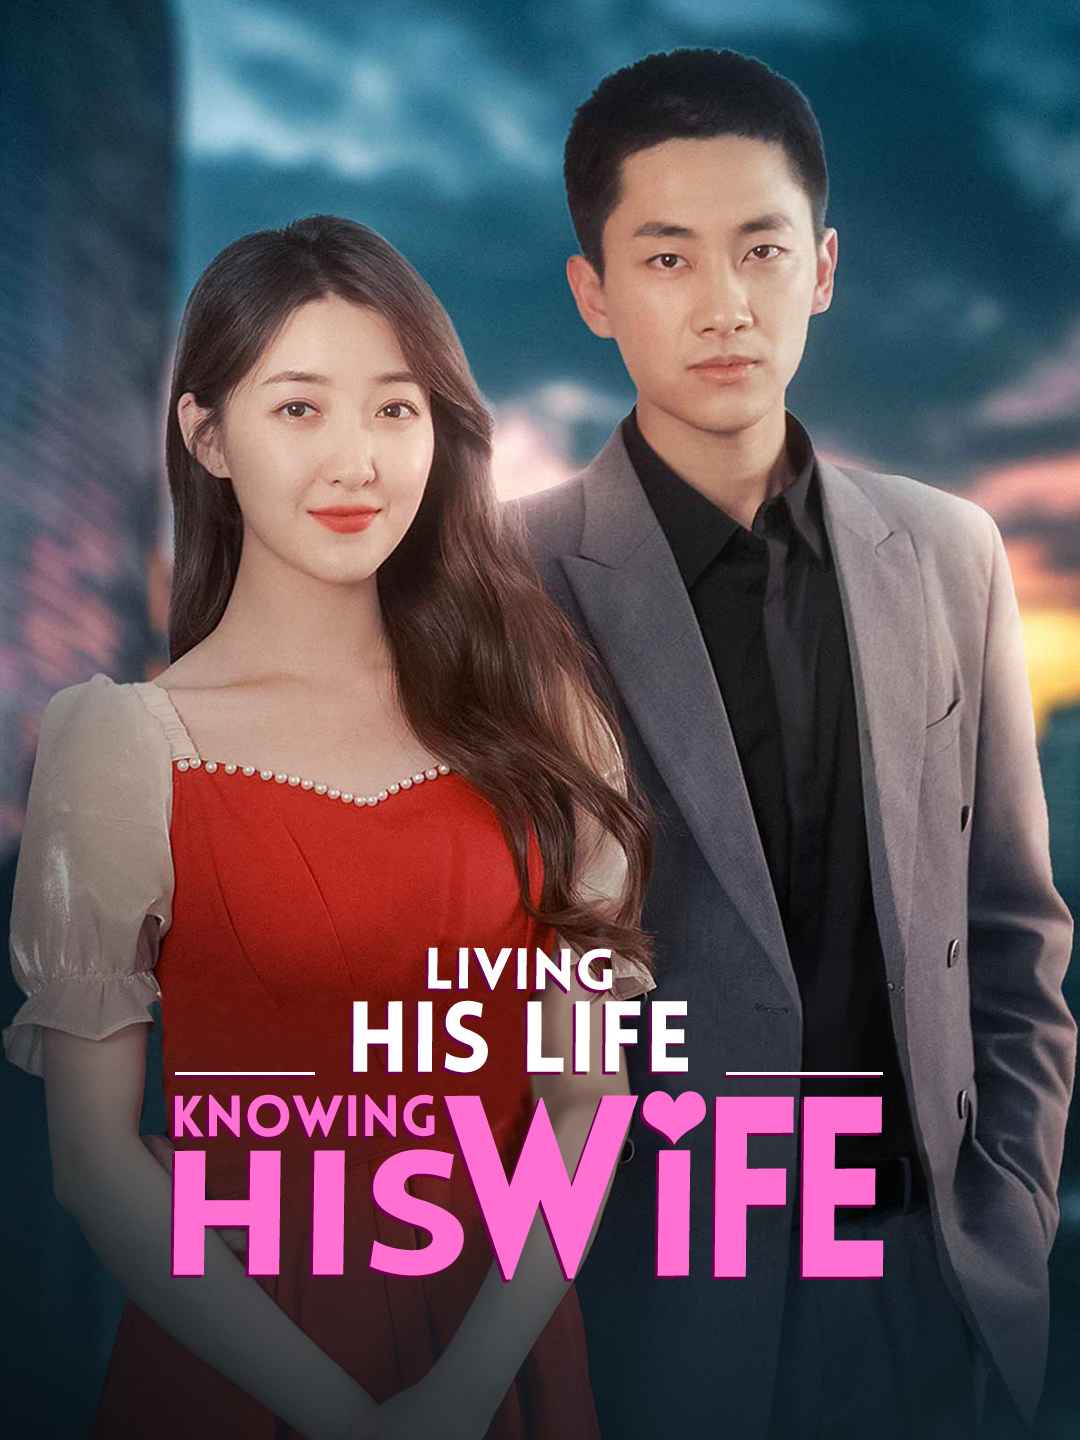 Living His Life, Knowing His Wife